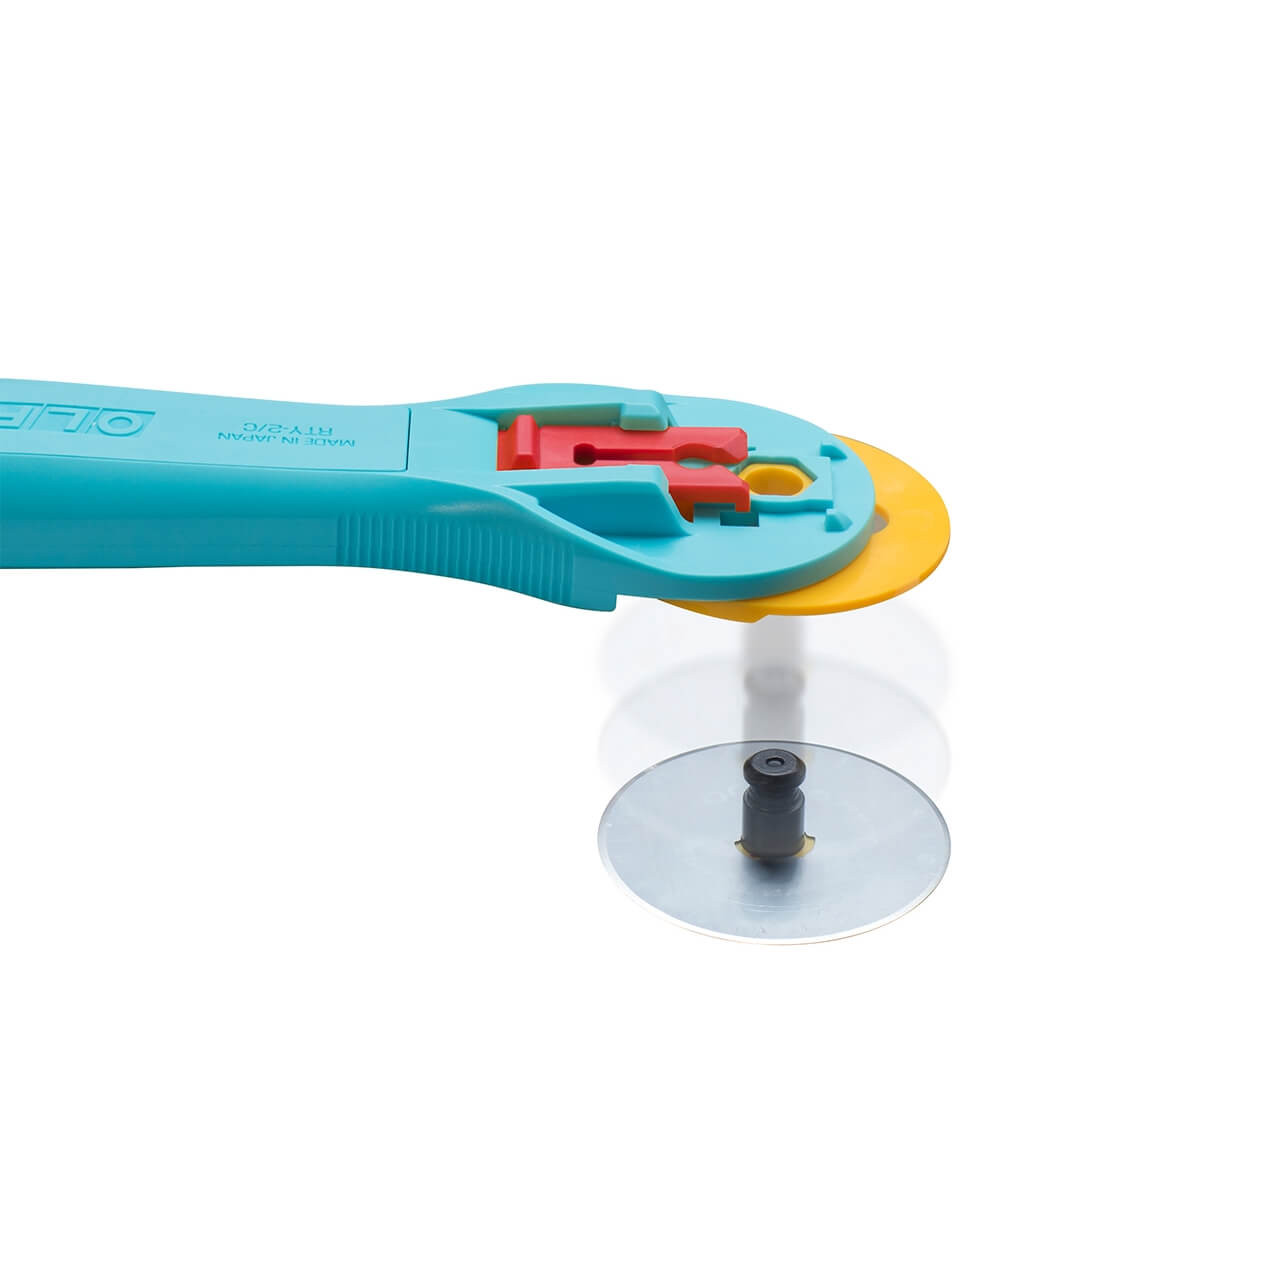 OLFA 45mm Quick-Change Rotary Cutter with its blade detached, demonstrating the quick-change mechanism, against a reflective surface.